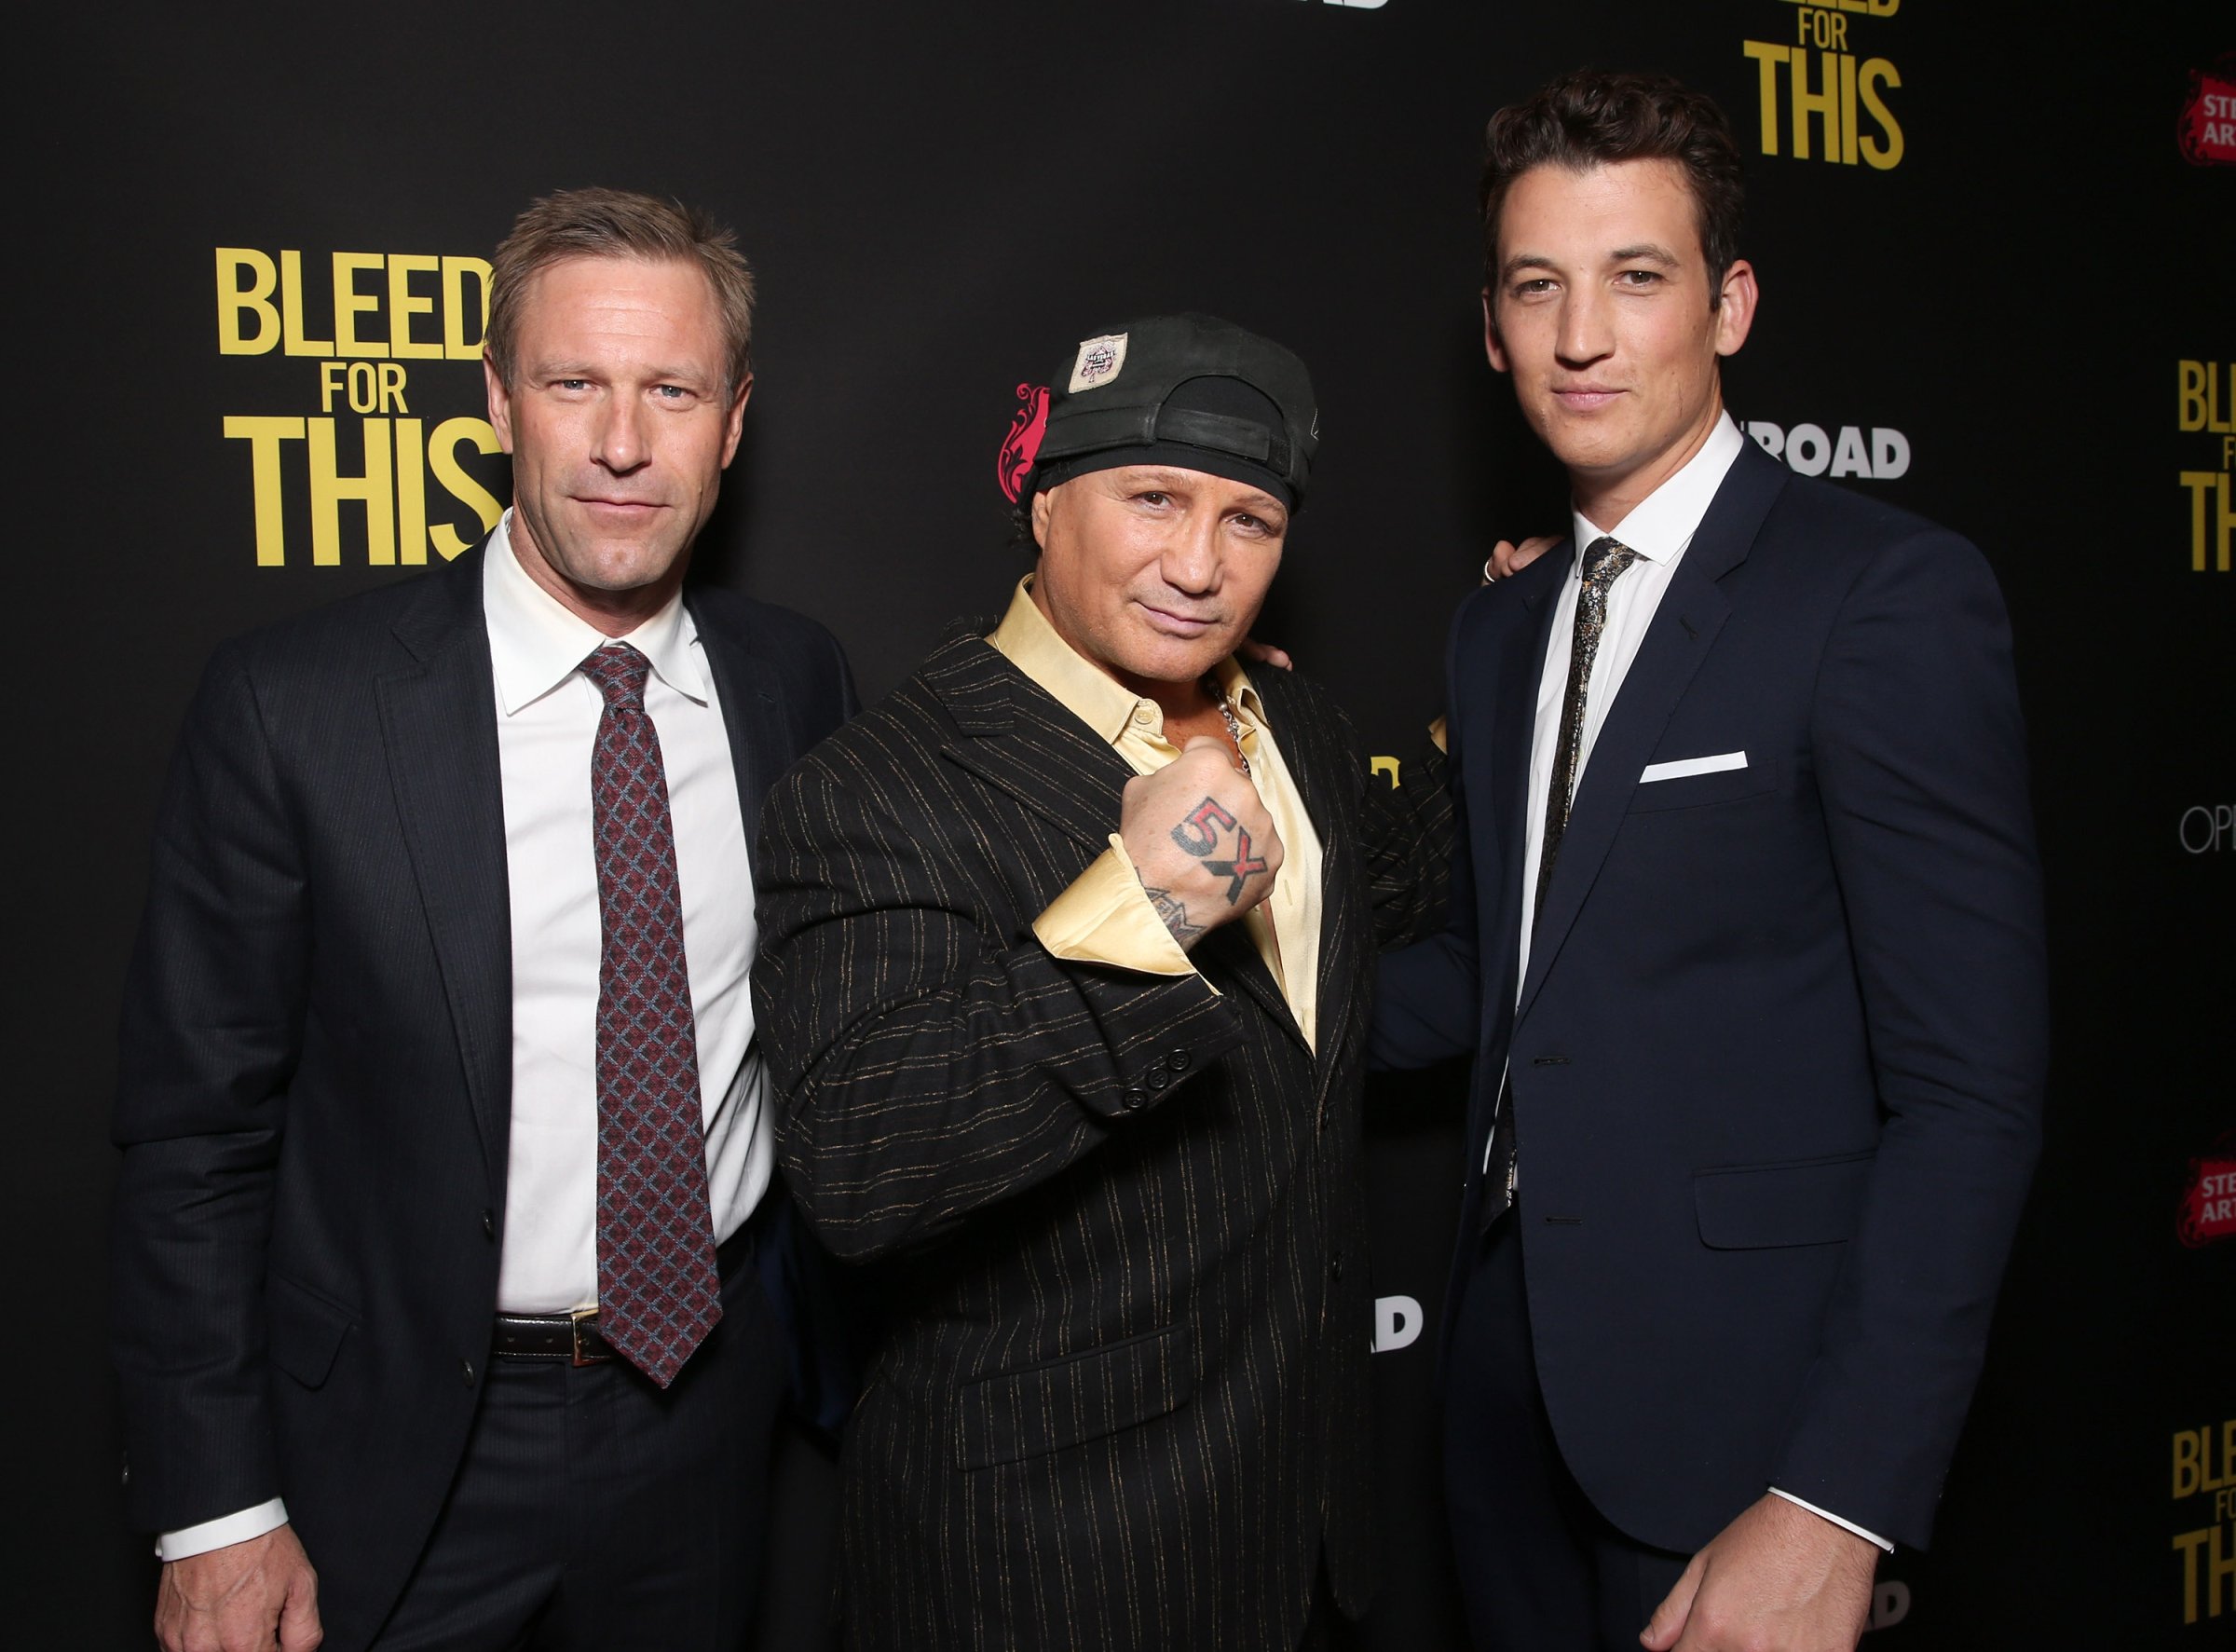 Aaron Eckhart, Vinny Paz and Miles Teller attend the Premiere of "Bleed For This" on November 2, 2016 in Beverly Hills, California.